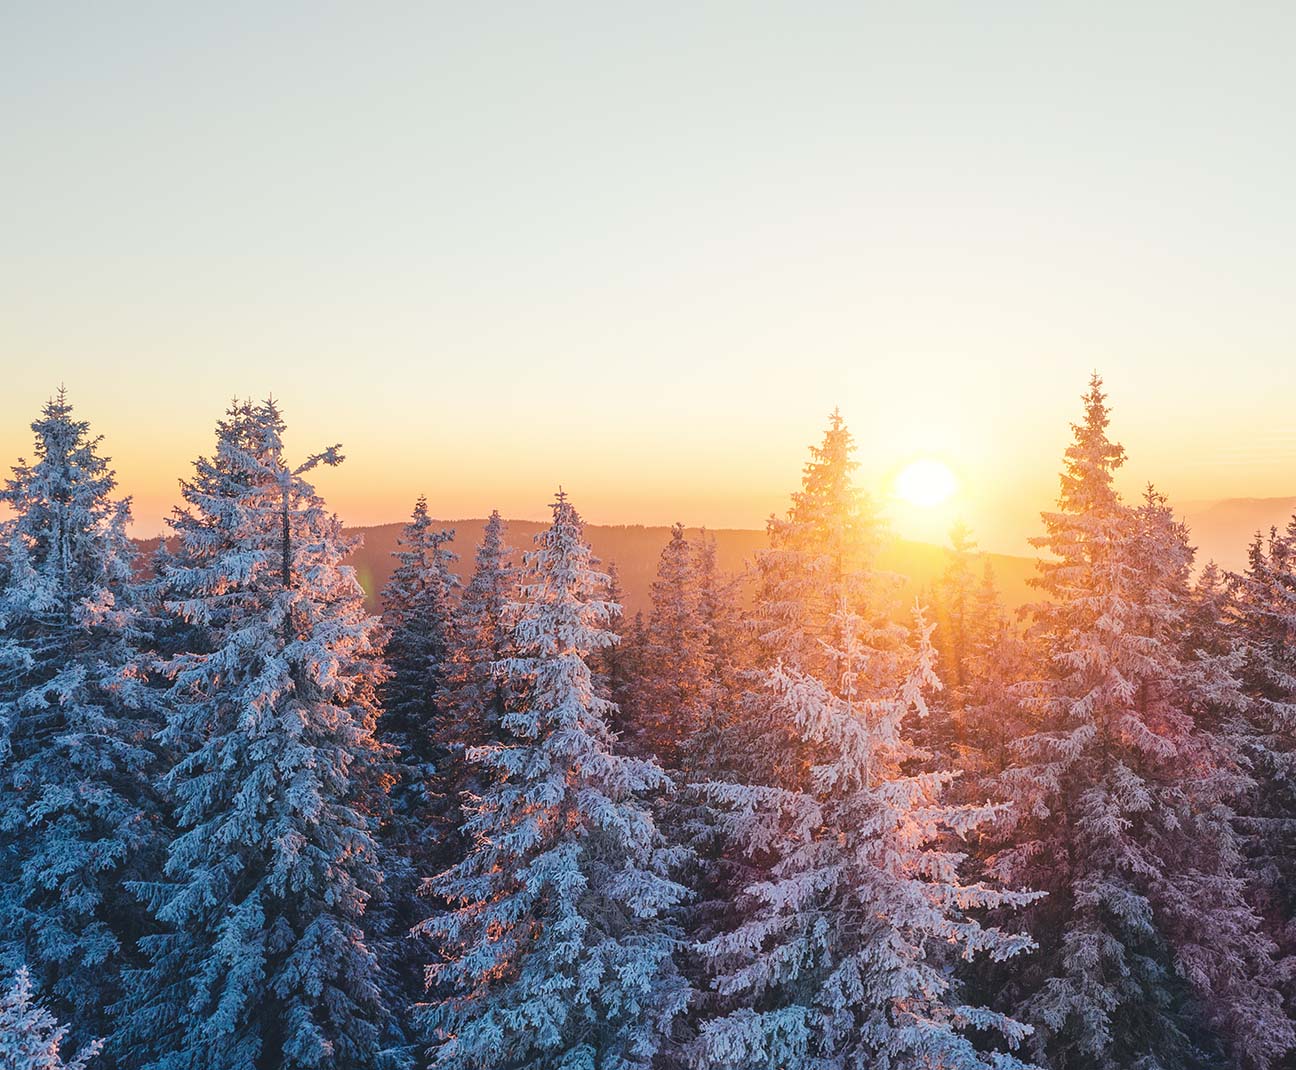 snowy pine forest at sunset